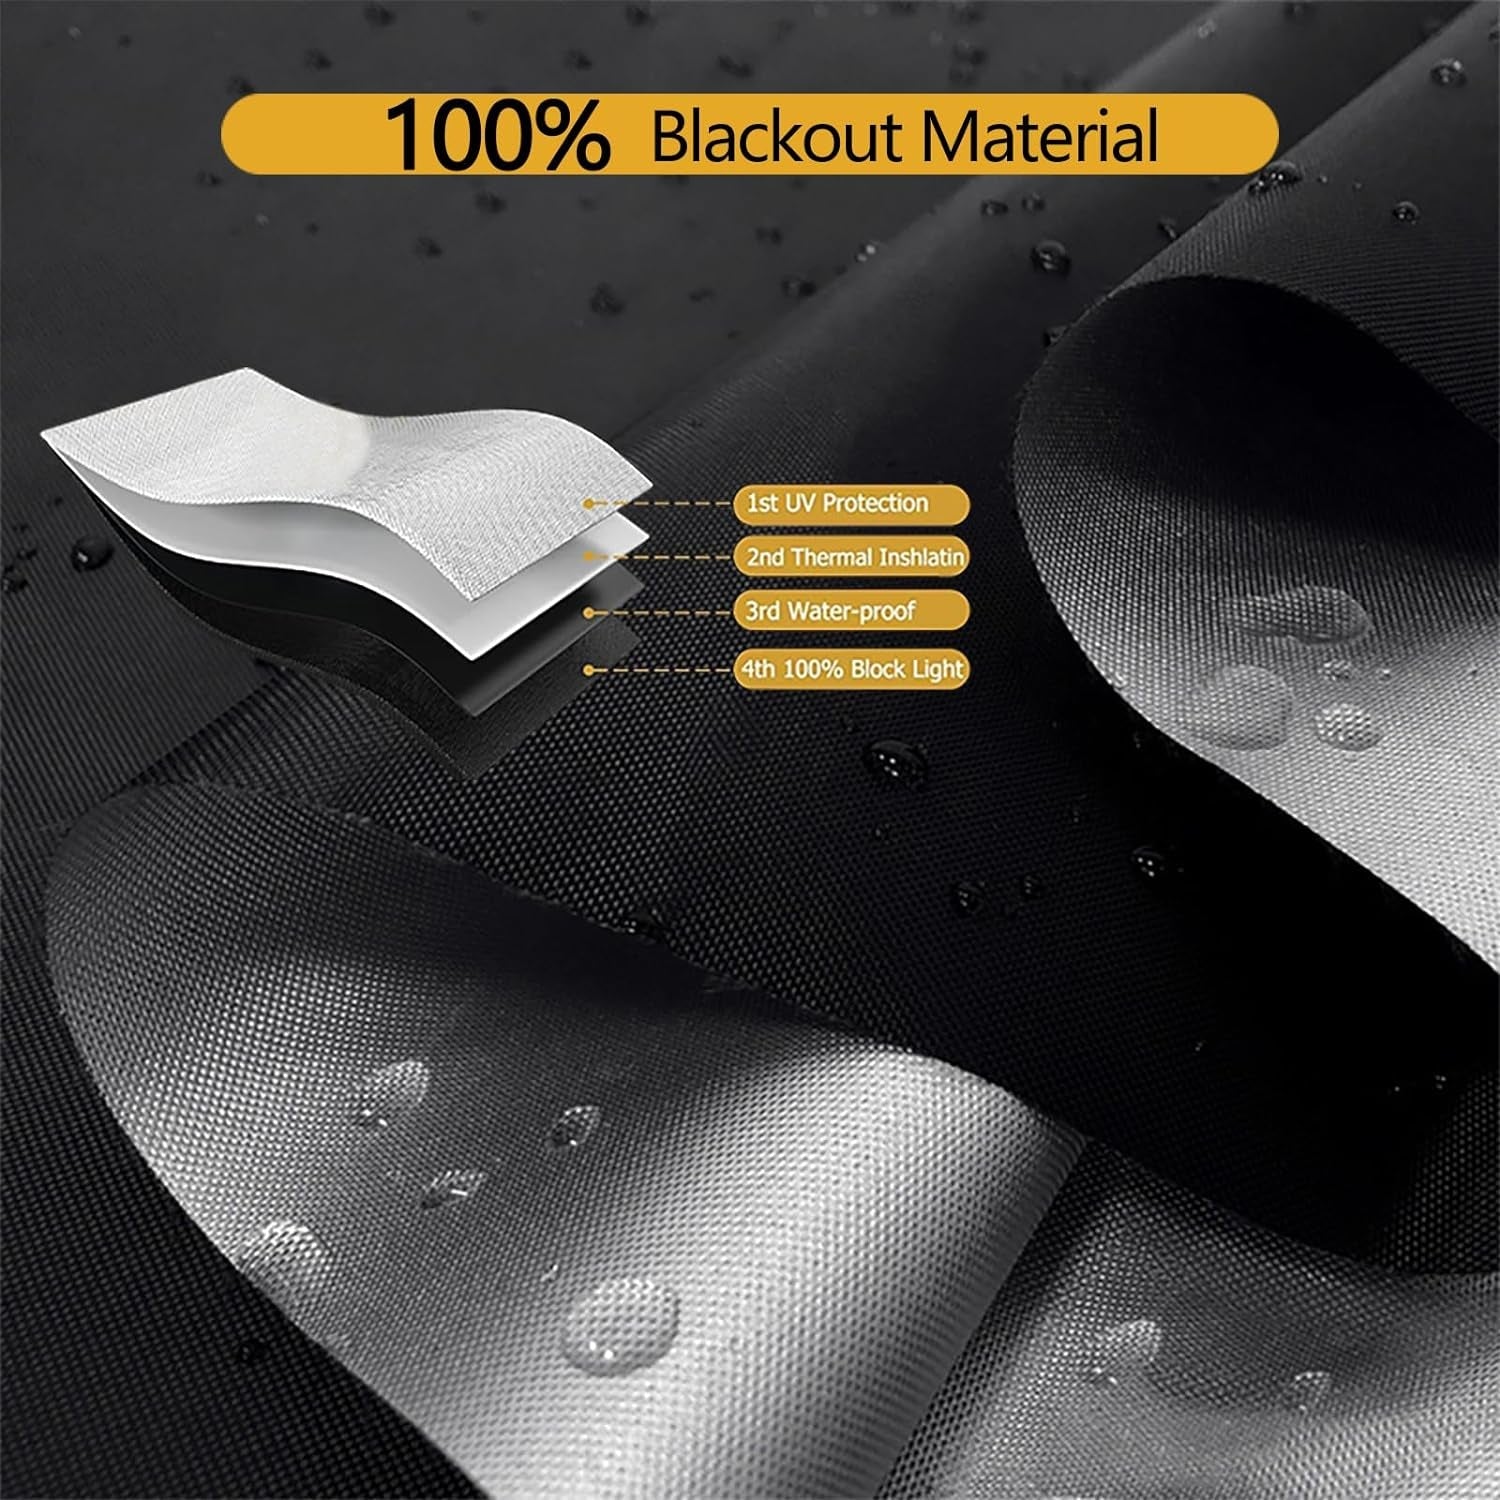 Blackout Shades - (39" X 57") Portable 100% Windows Blackout, Blackout Curtains for Bedroom, Temporary Shades & Blinds for Window, Home, Baby Room, Dorm Room, Rv, Office, Nursery, Travel